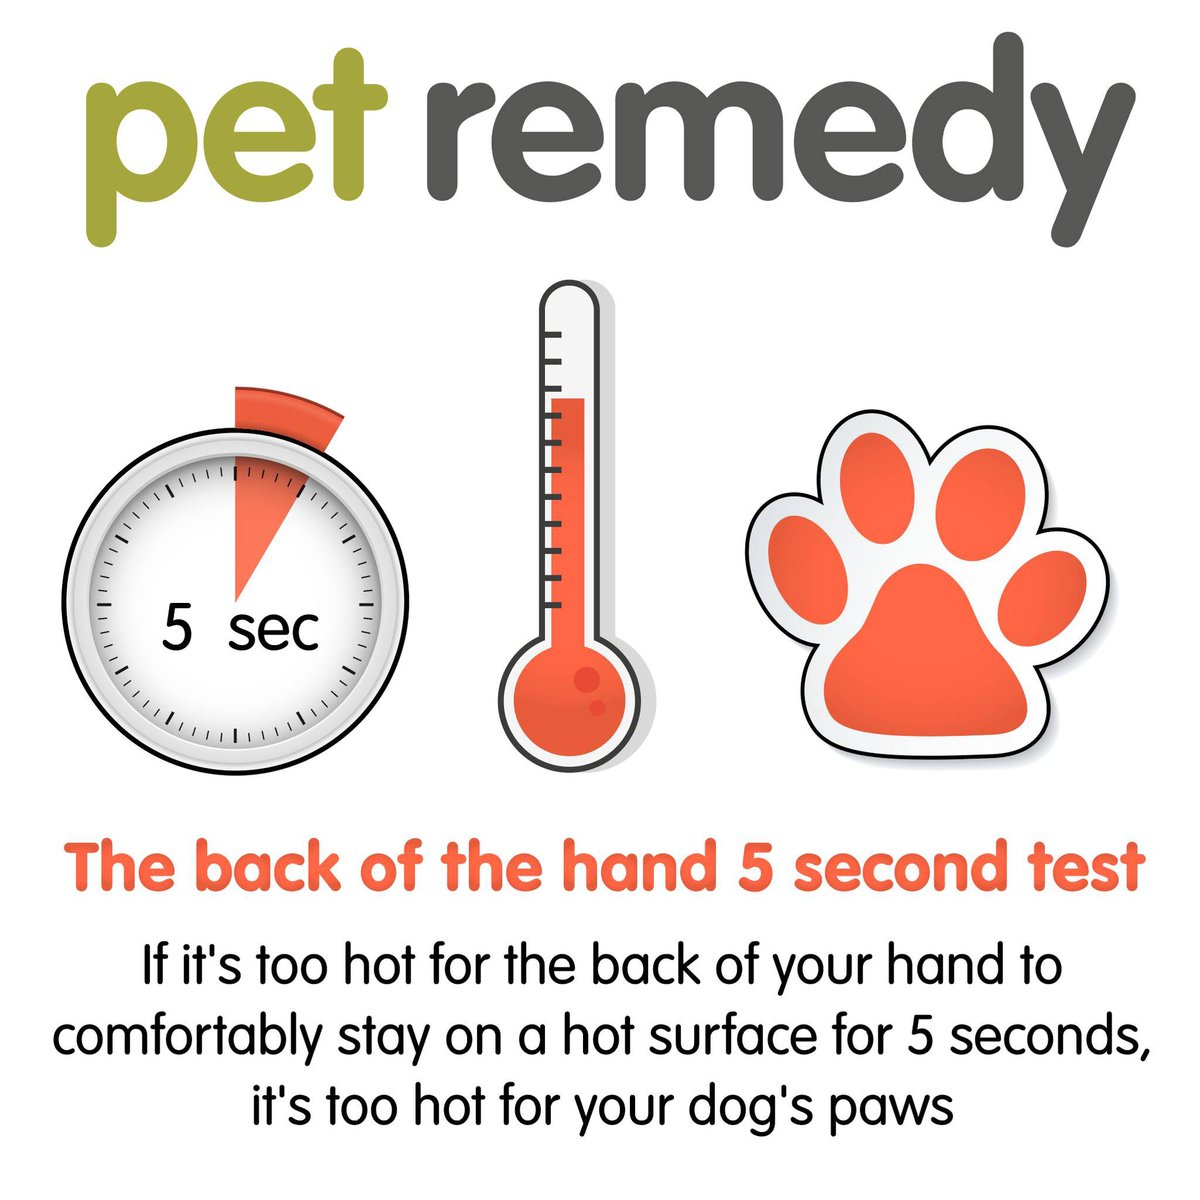 1. Follow the five-second rule, and check the surface for heat with the back of your hand, before you leave the house. 2. Keep to grass. 3. Walk early in the morning or late in the evening when surfaces are cooler. 4. Invest in a pair of booties to help avoid burning paws.